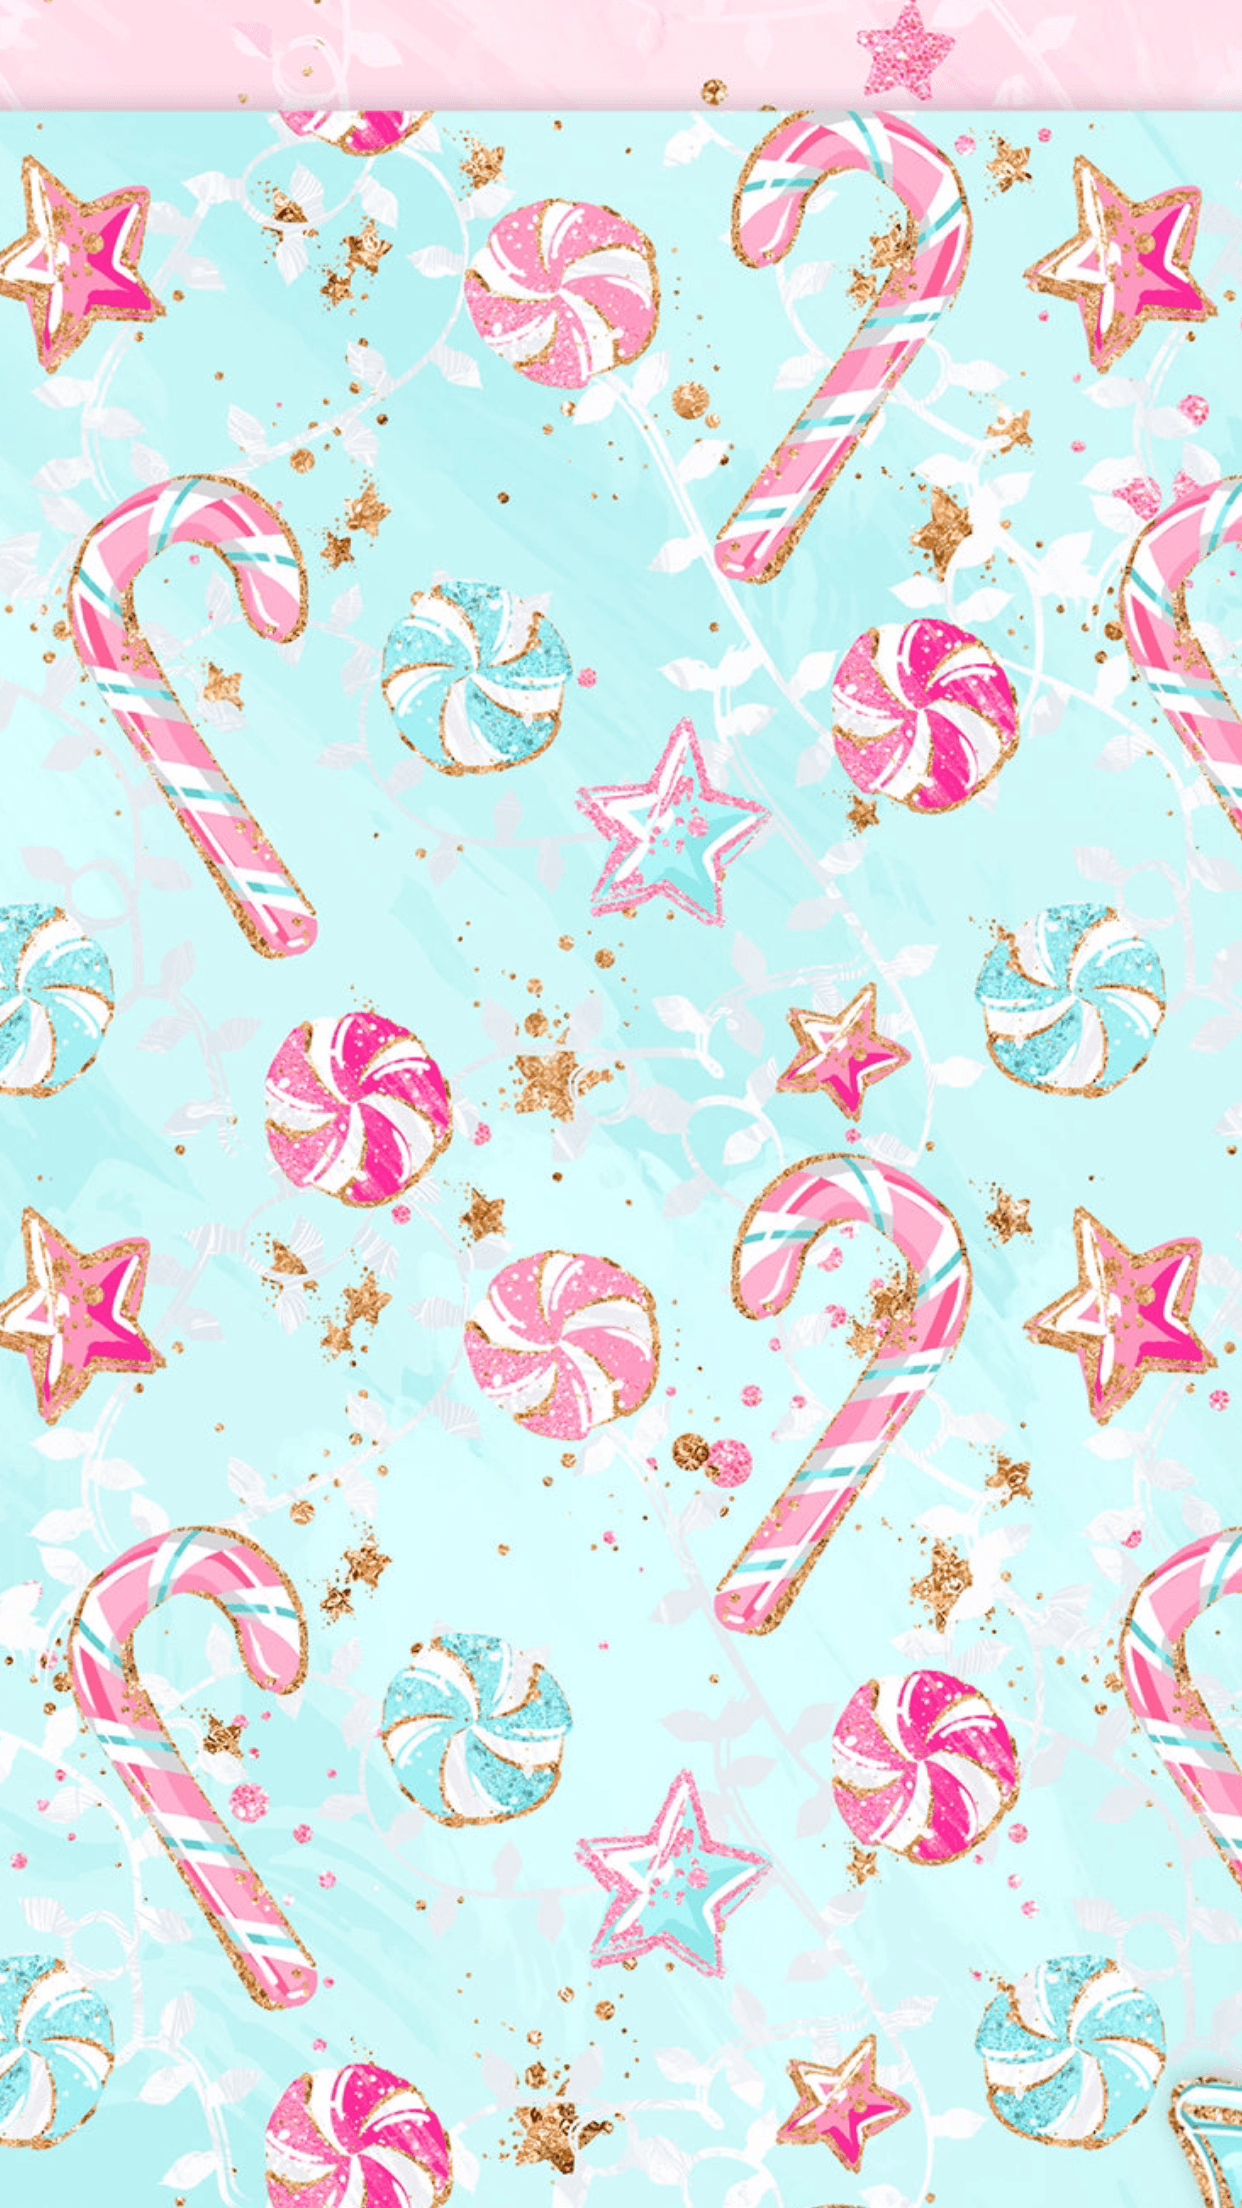 Christmas candy cane mints stars. Wallpaper iphone christmas, Christmas wallpaper, Christmas wallpaper background